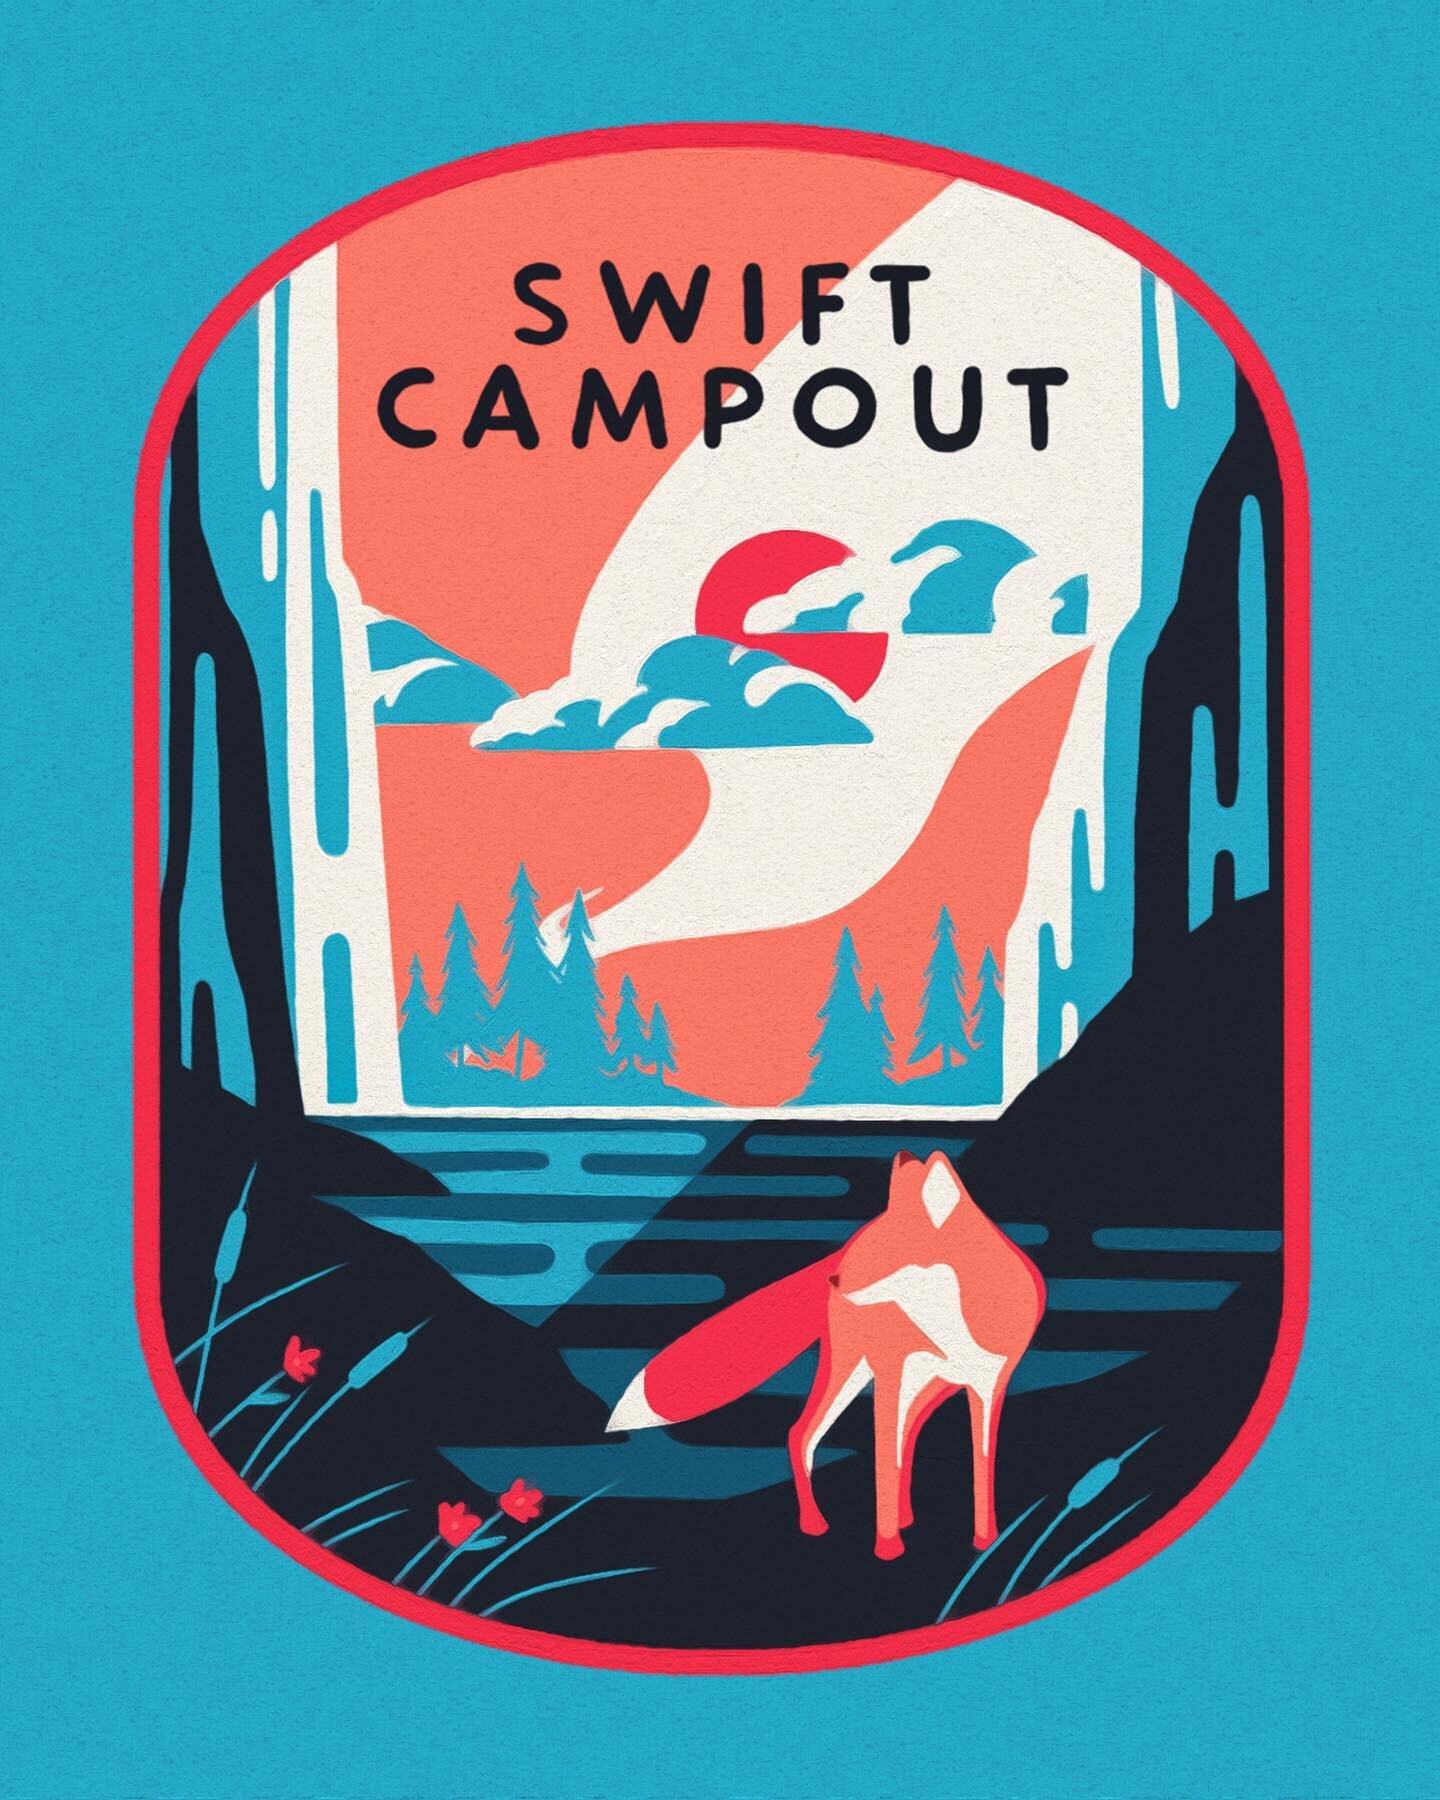 At last! I can finally share what&rsquo;s been months in the making. Humongous thanks to @swiftindustries for inviting me to create the look for this years Swift Campout with them. There are a buuunch of goodies that I&rsquo;ll be sharing over the co